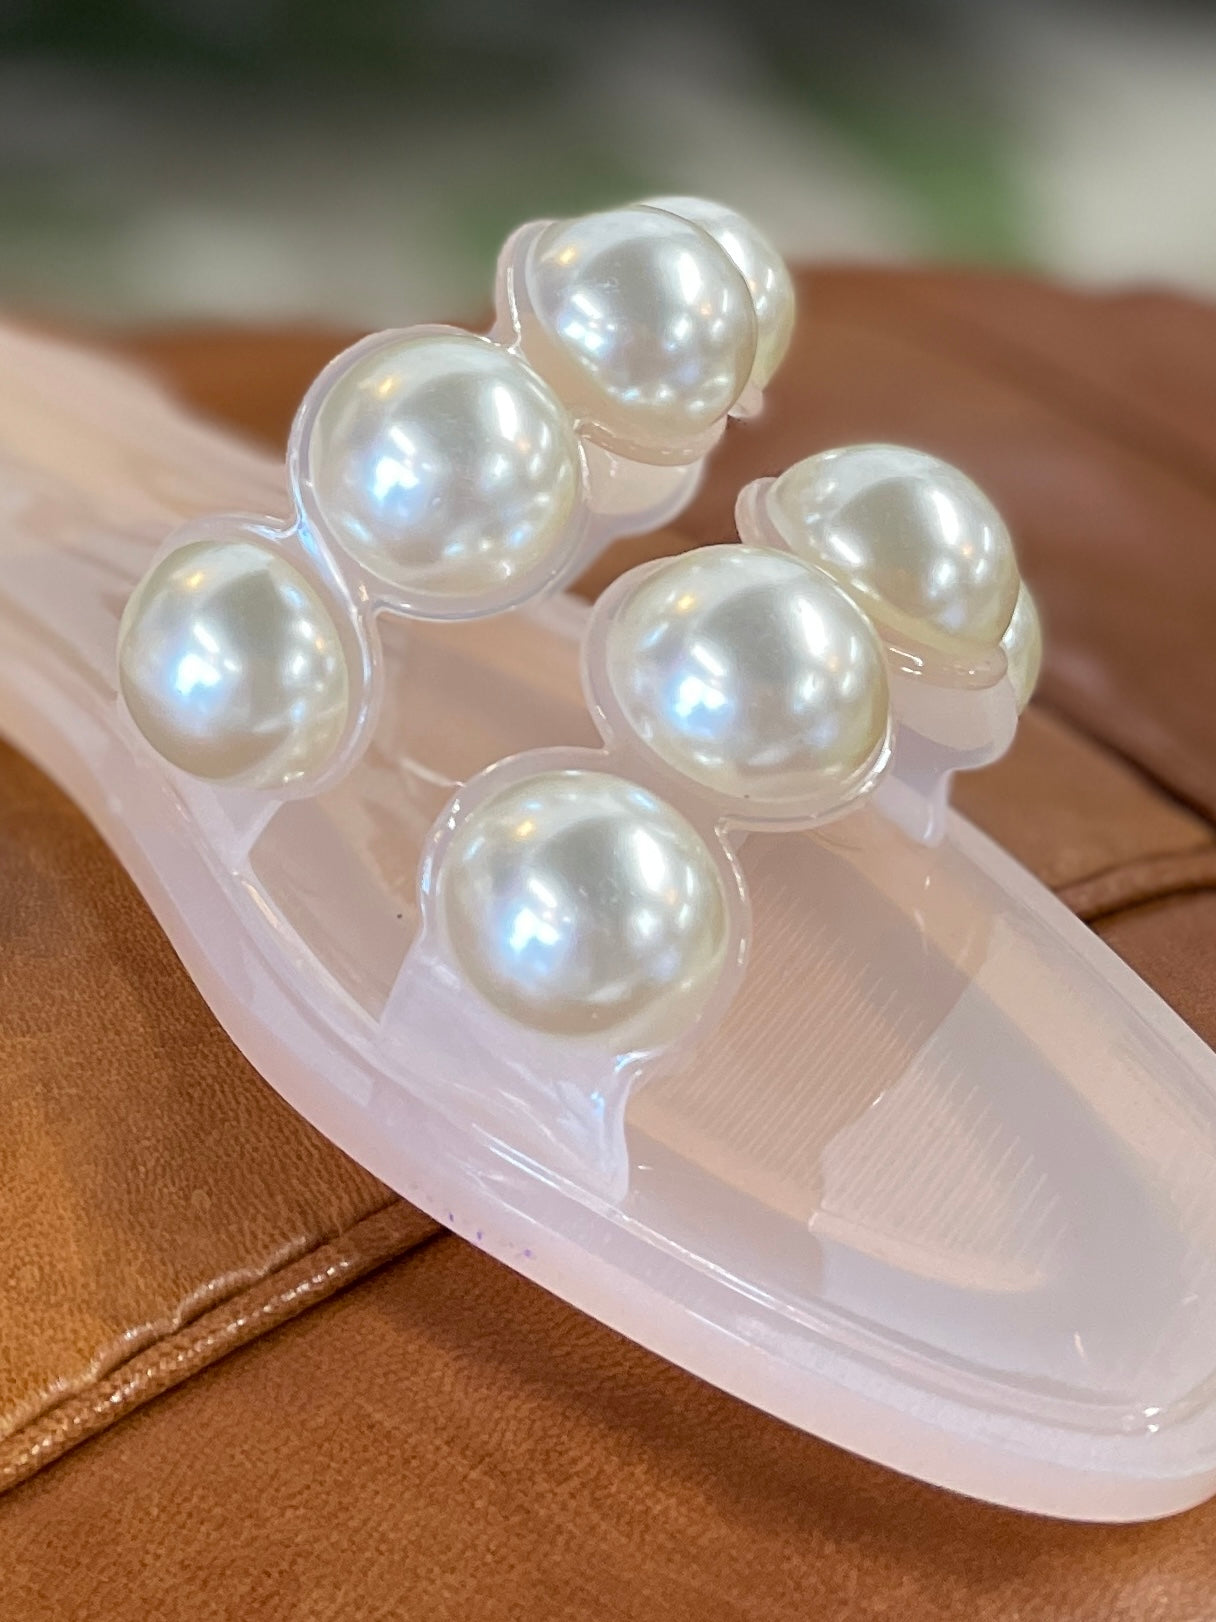 Jelly Sandals with White Pearls for the Summer